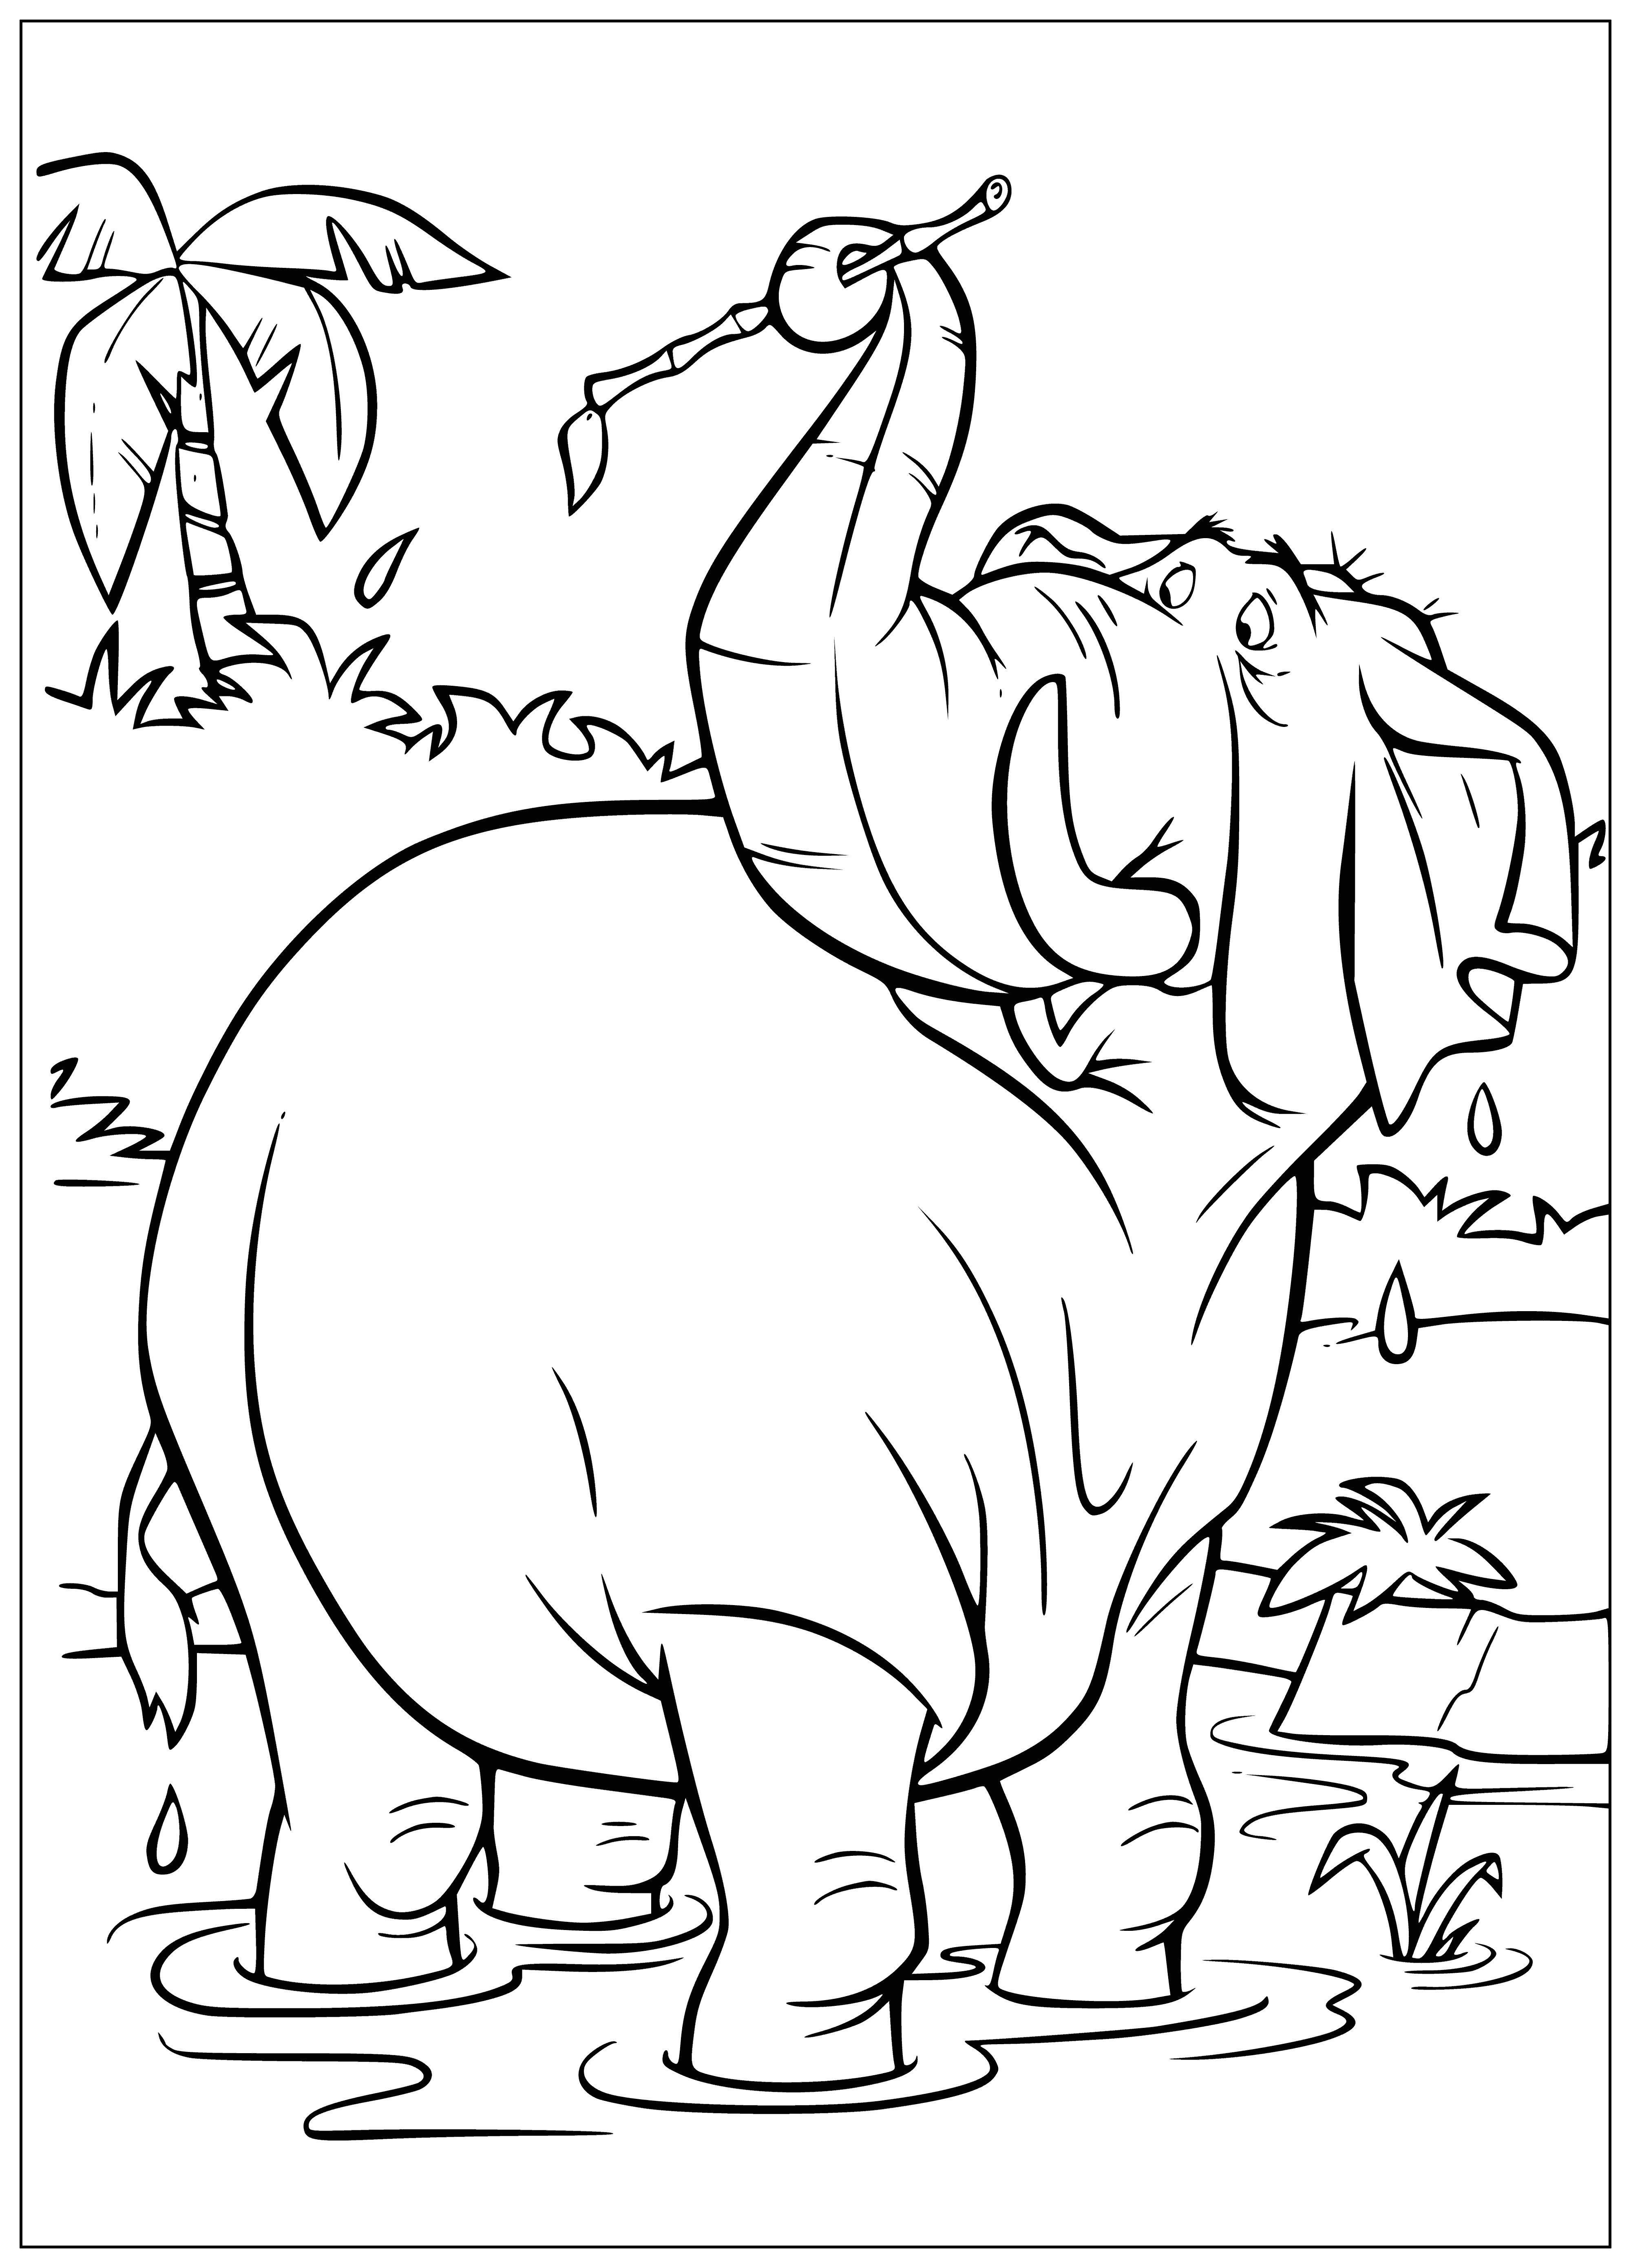 coloring page: -> A large elephant stands in a jungle, with trunk and tusks, surrounded by trees and plants.